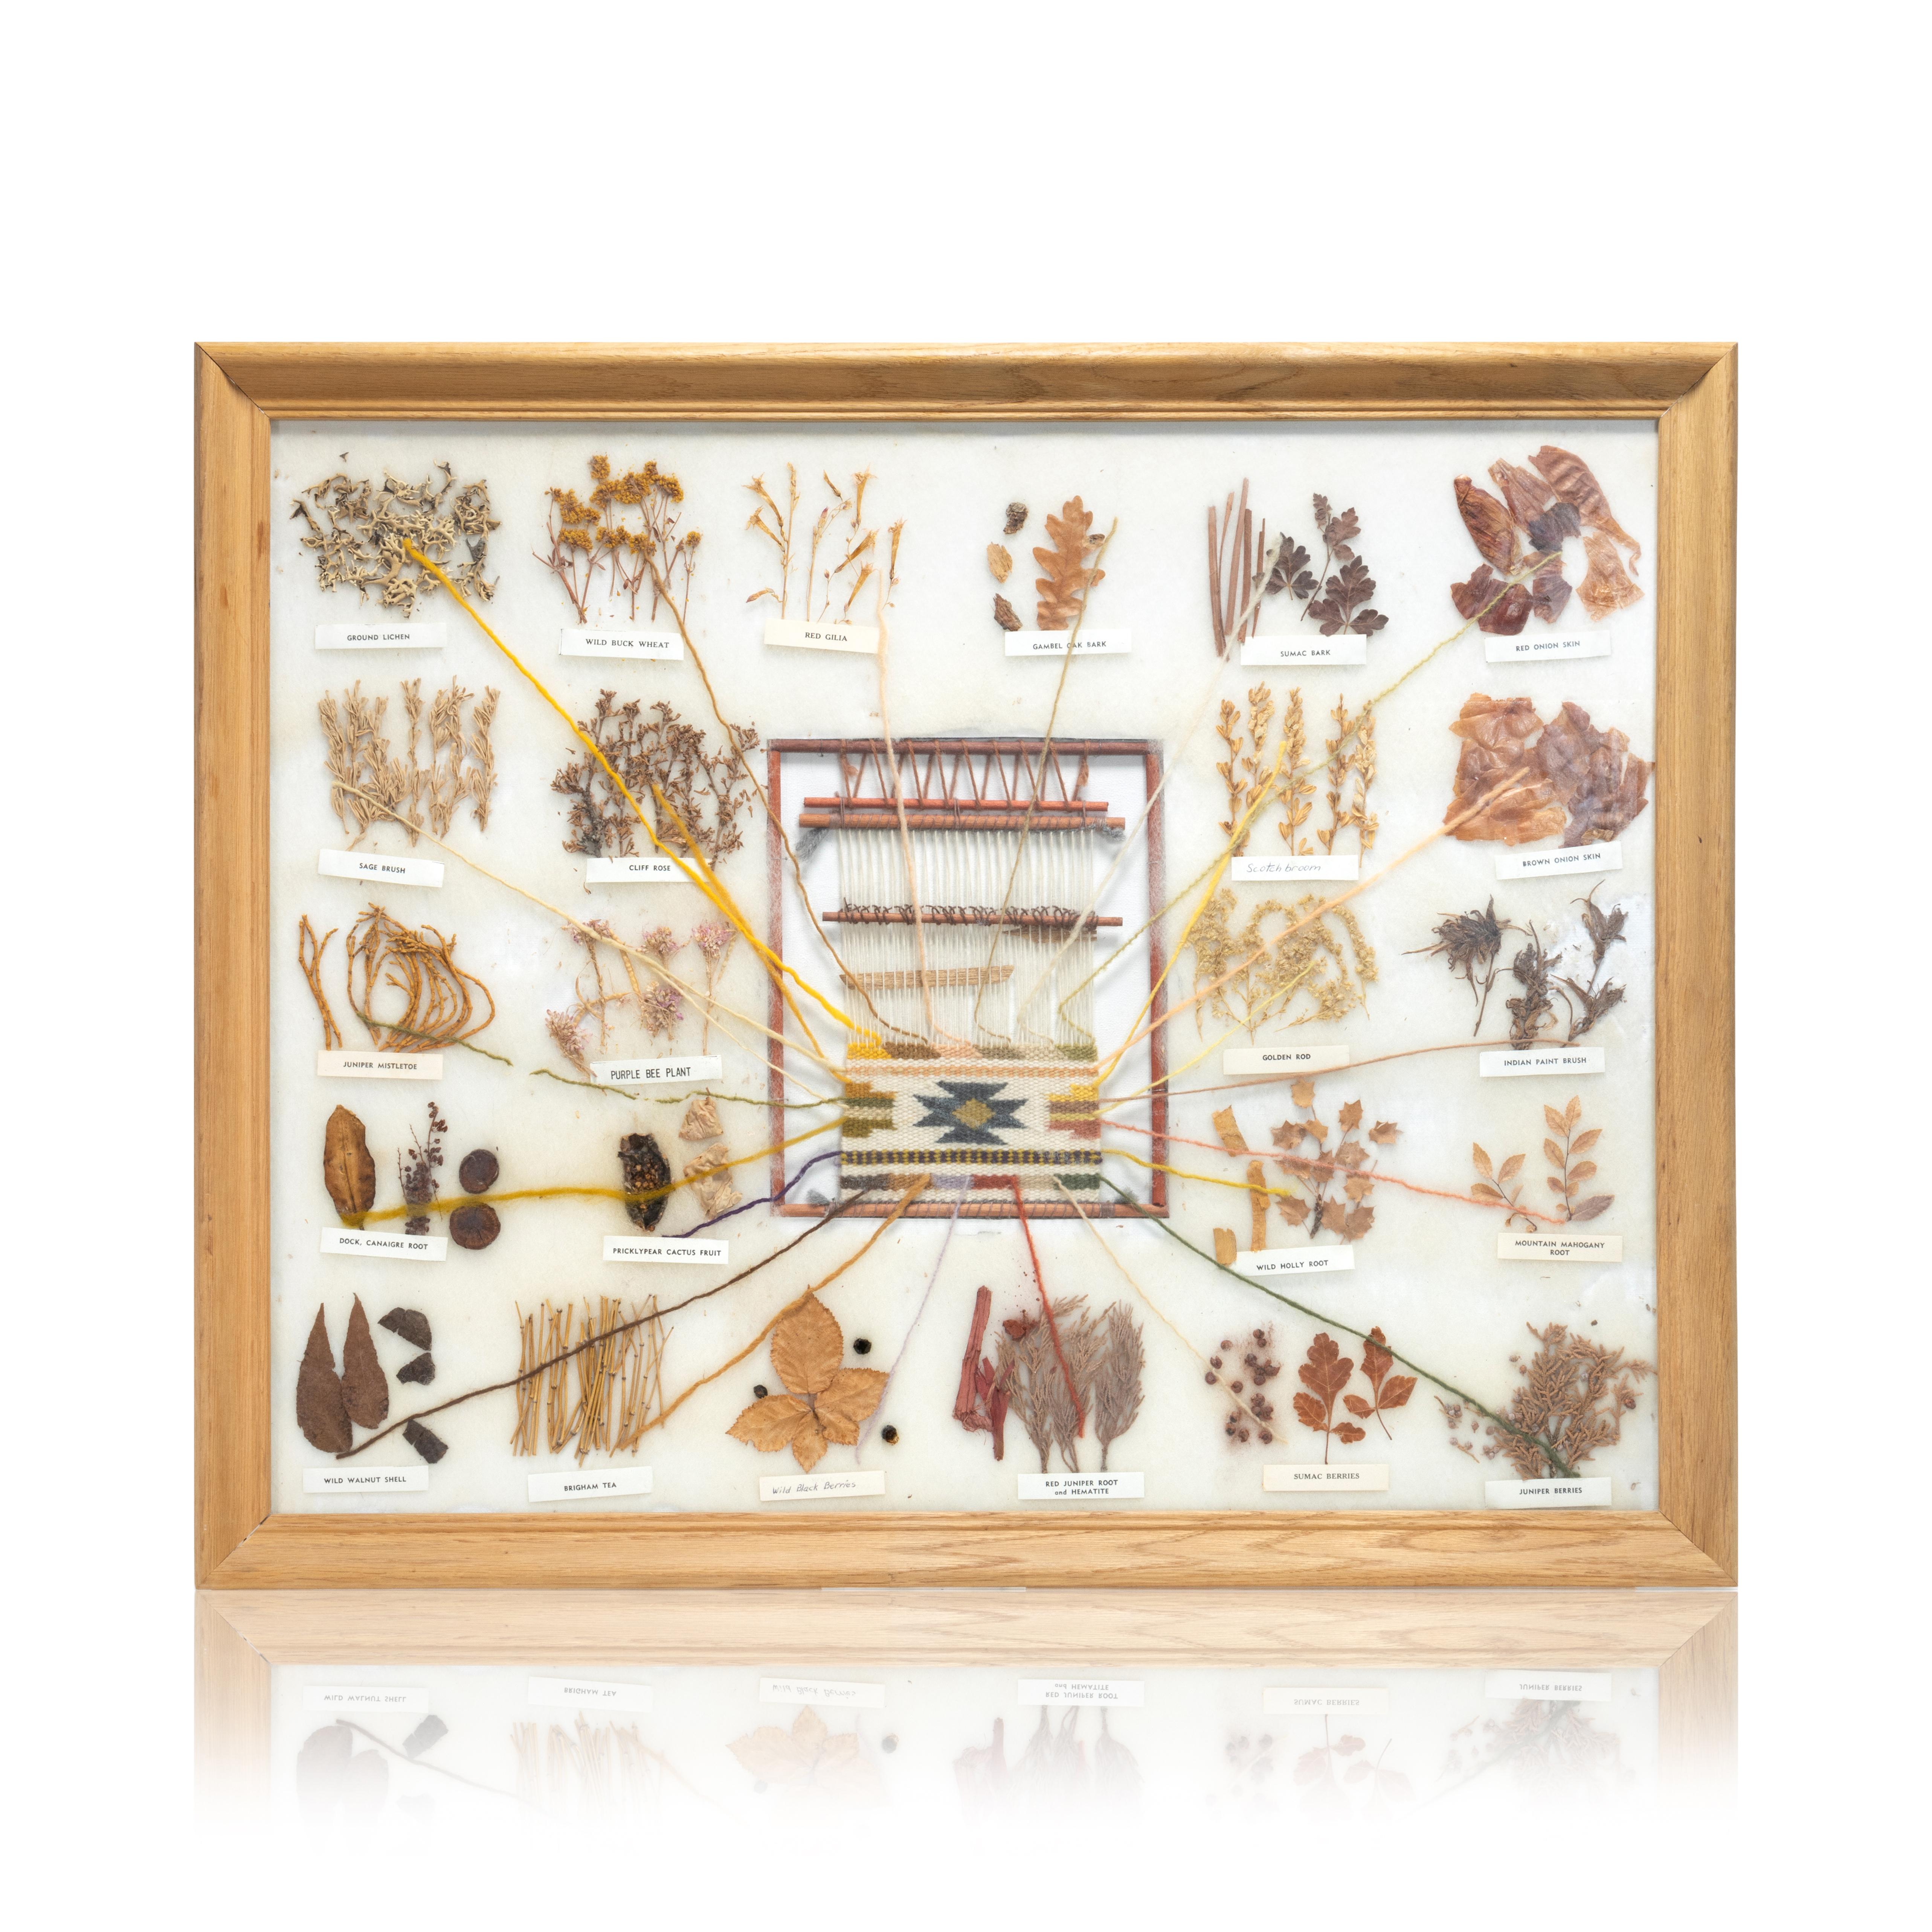 Framed collection of Native American dyes used to craft weavings. Authentic collection with each dye labeled (various plants, bees, brush, bark, vegetables). Weavers have been dyeing the wool for their weavings to create beautiful artistry nearly as